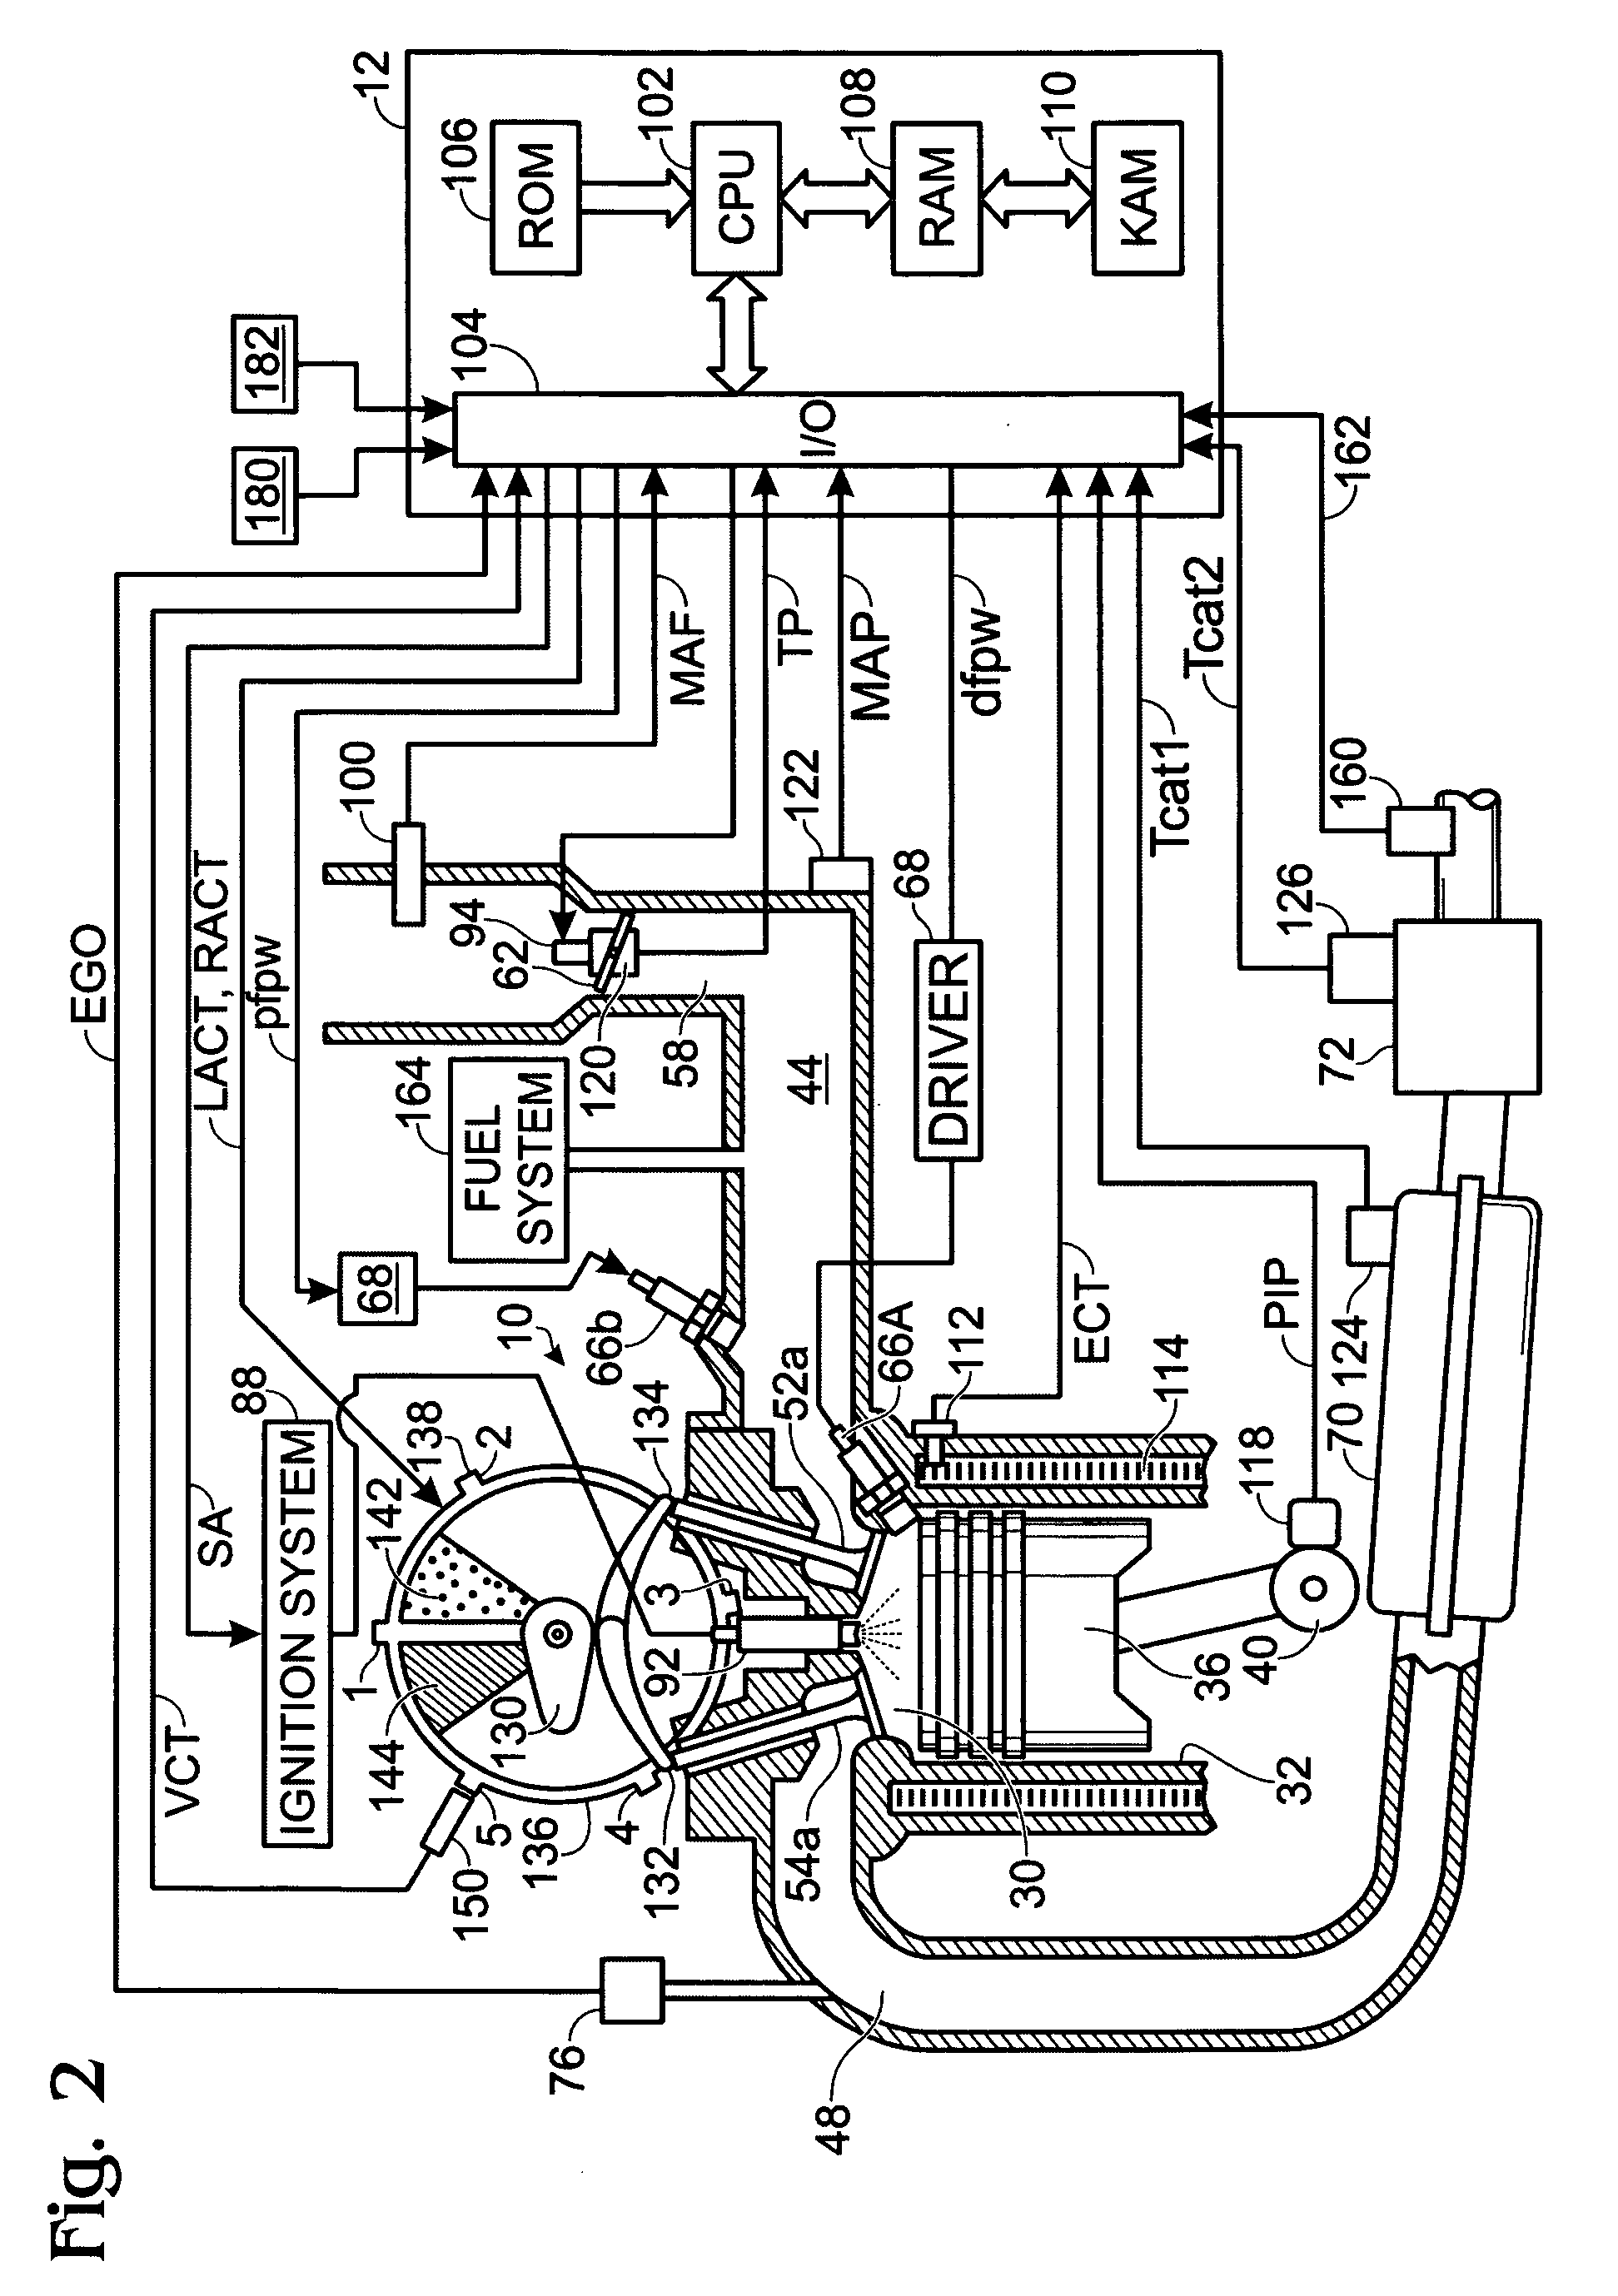 Engine with two port fuel injectors